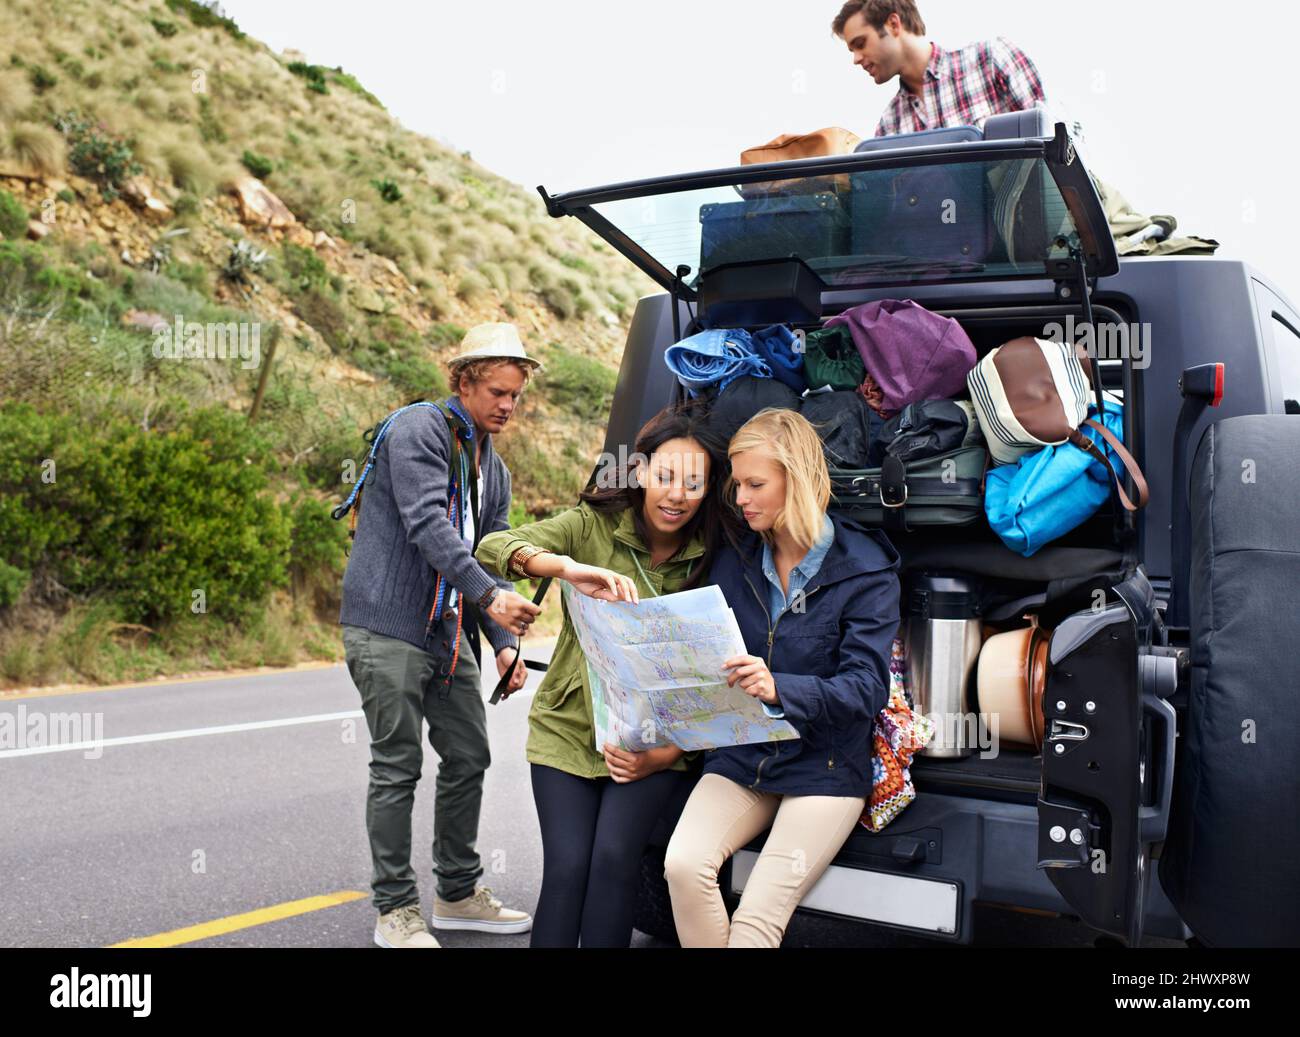 Planning the perfect road trip. A group of young friends preparing for their camping trip. Stock Photo